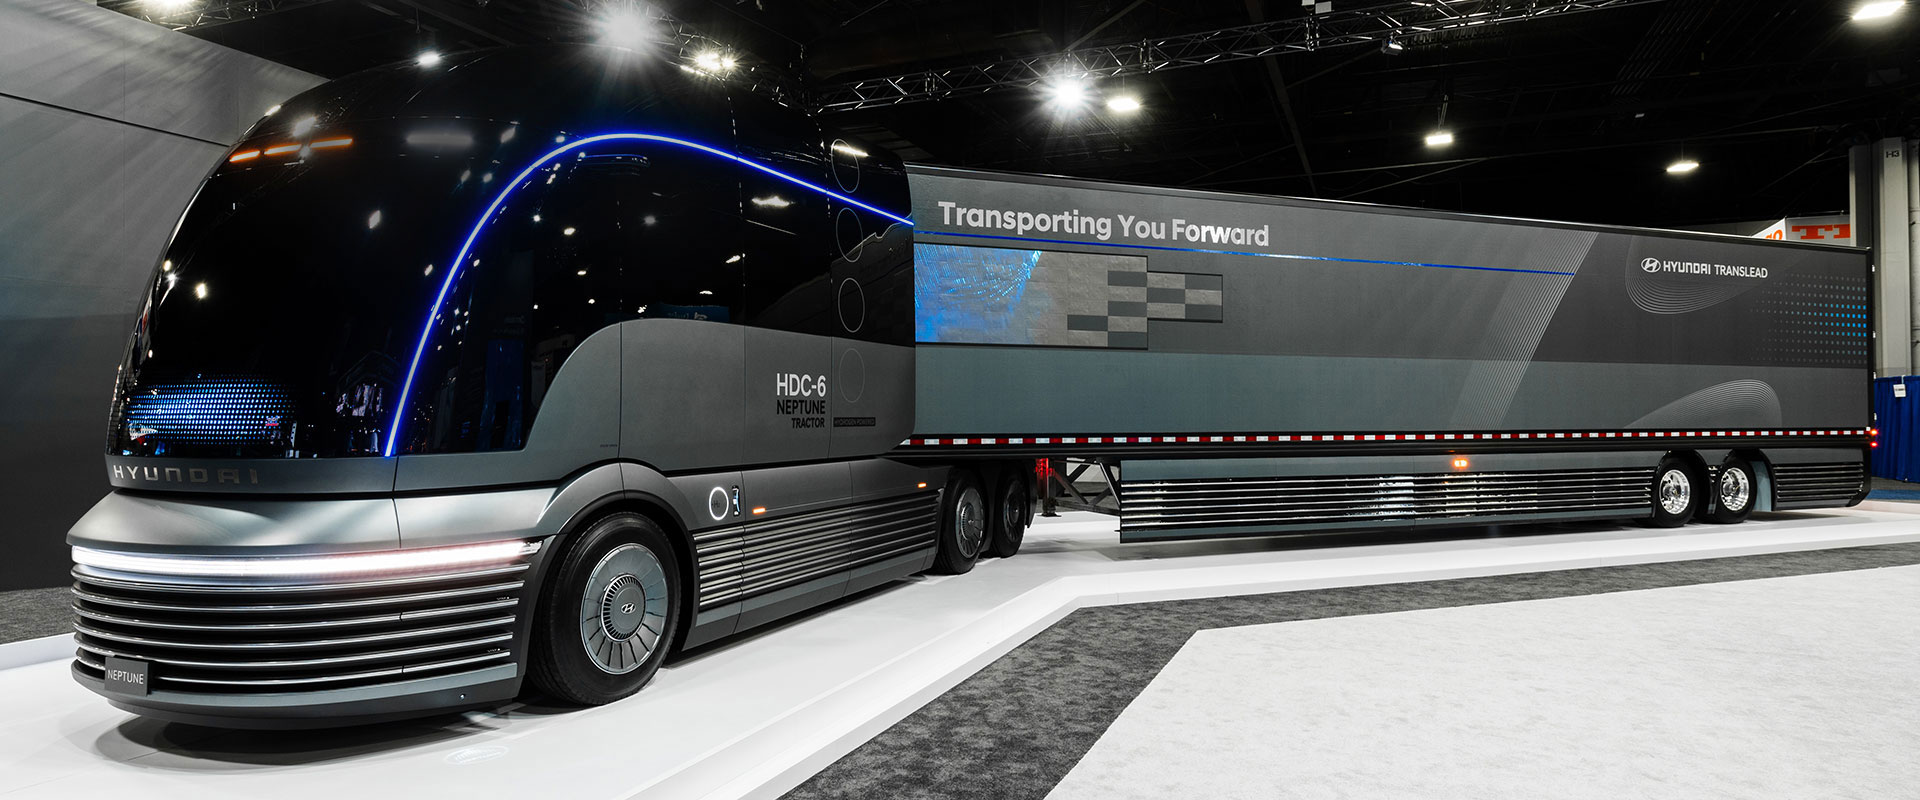 2019 North American Commercial Vehicle Show